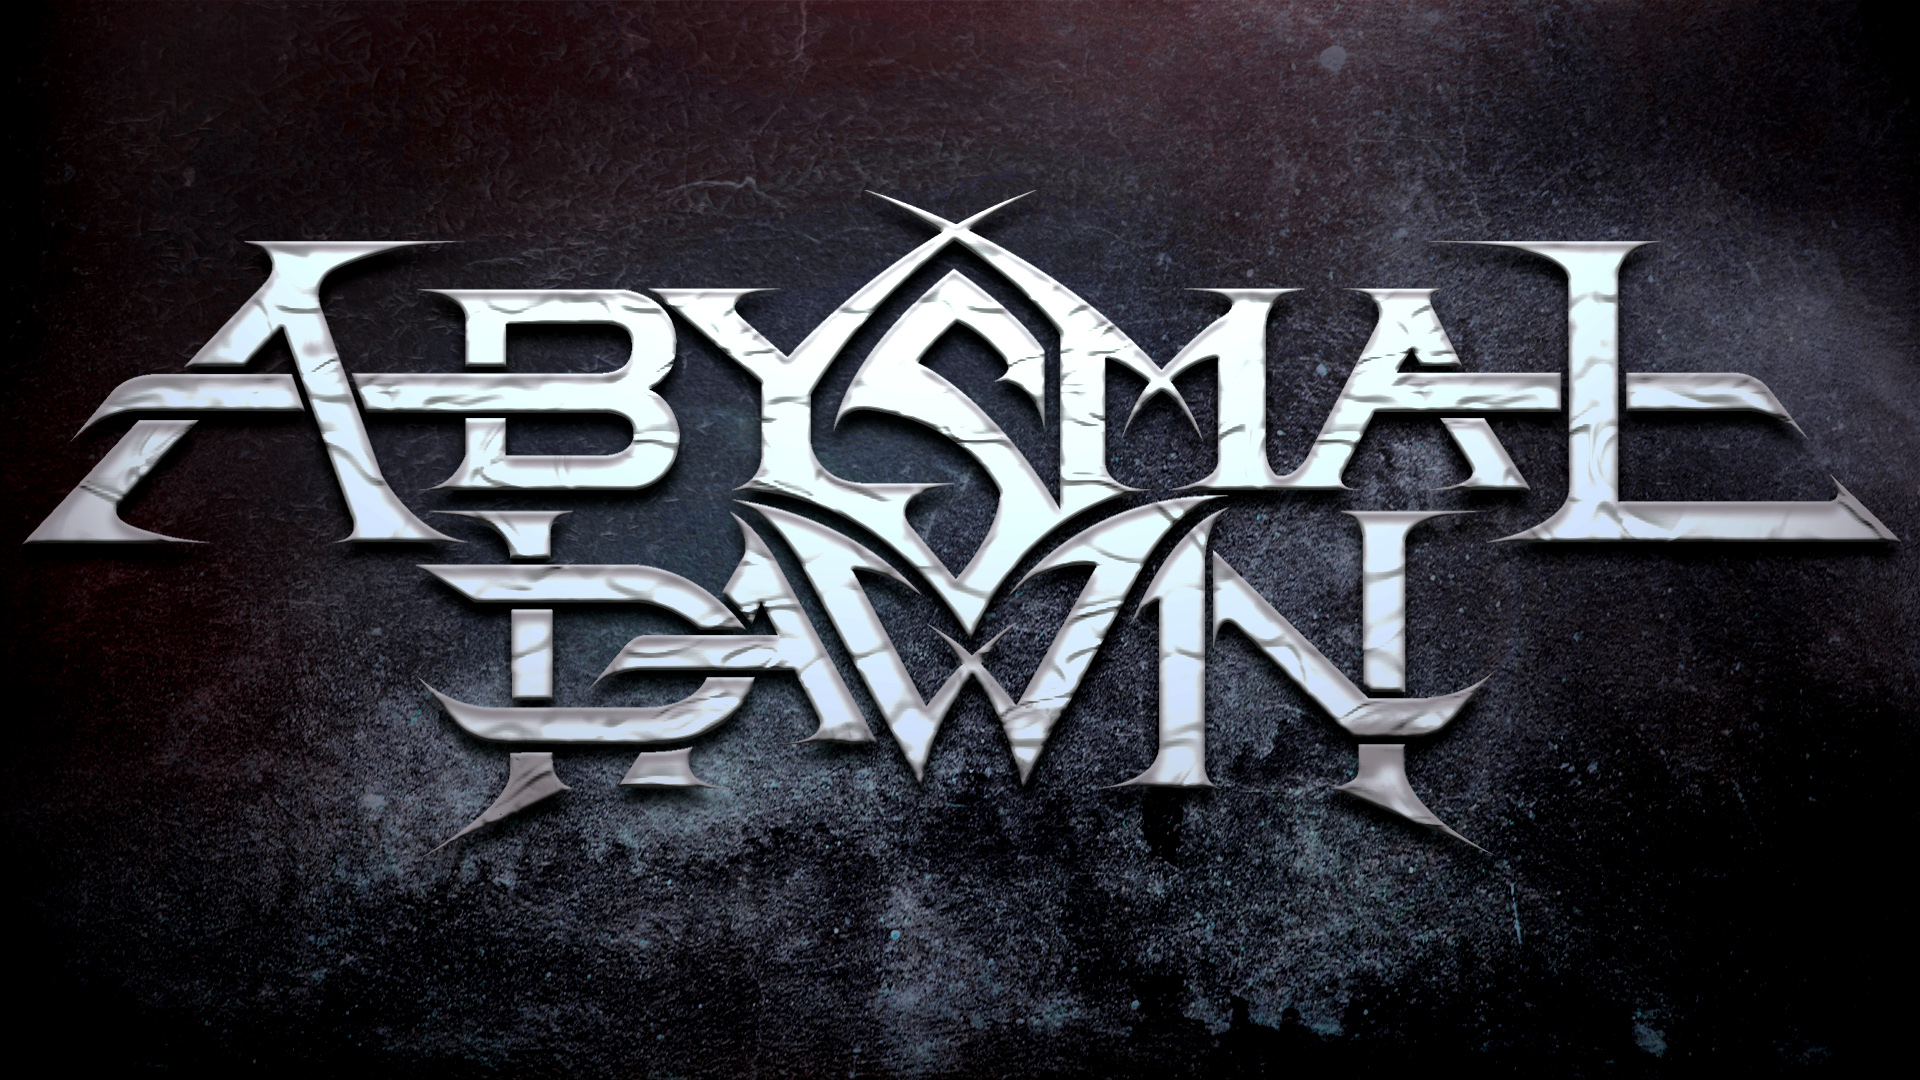 Music Abysmal Dawn HD Wallpaper | Background Image